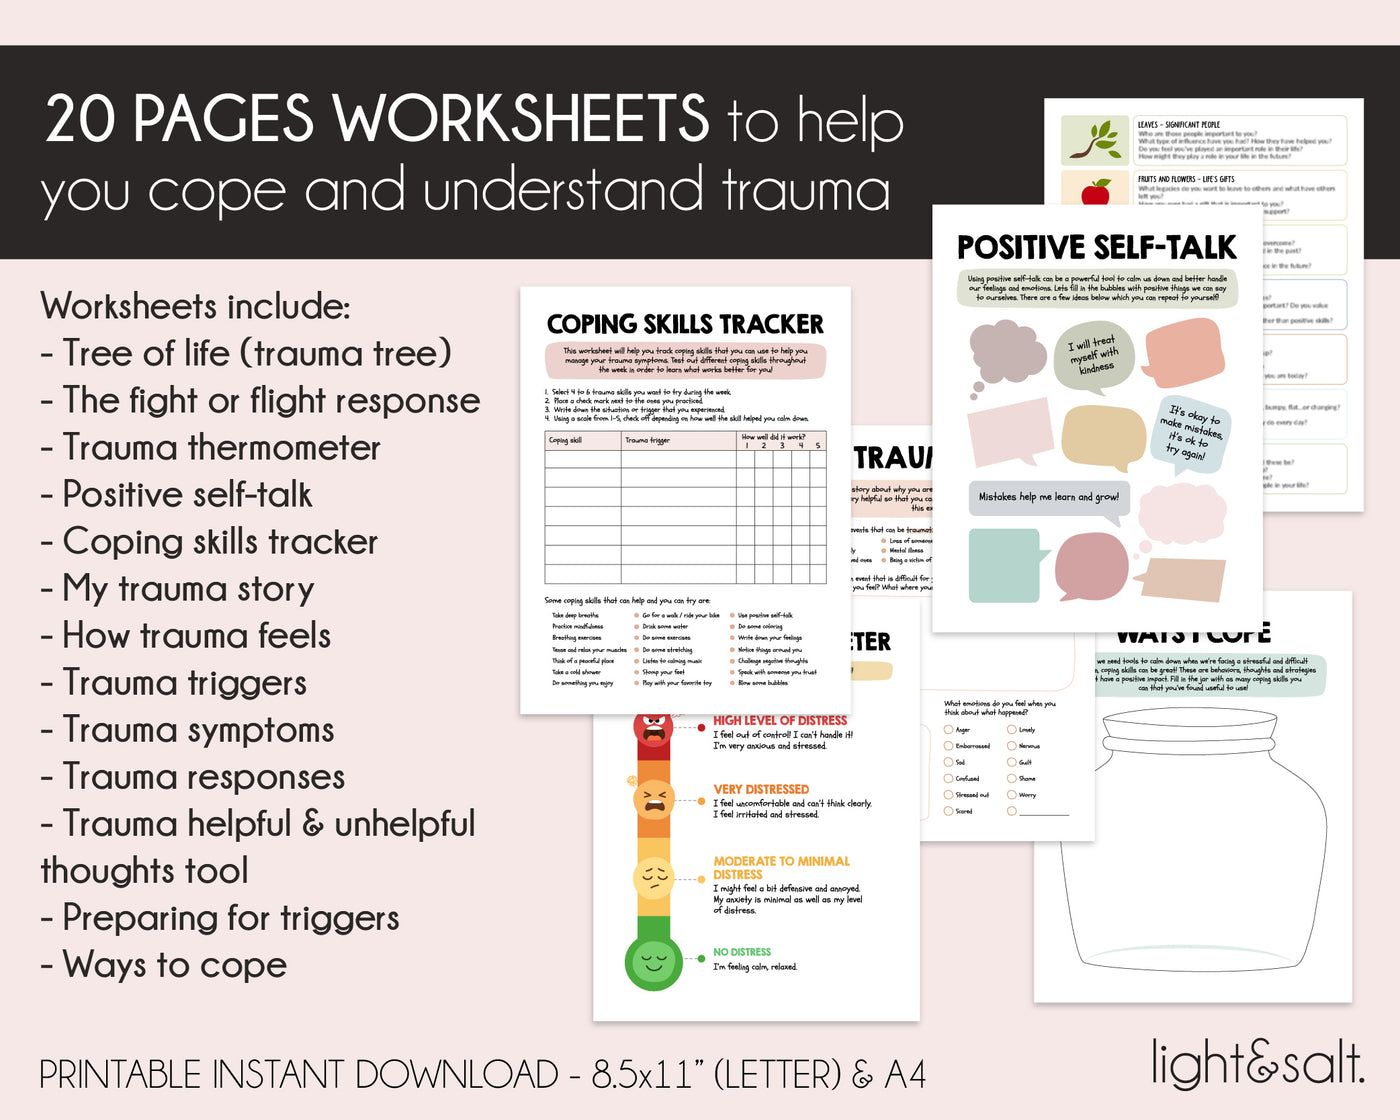 Trauma therapy worksheets for kids, teens and adults